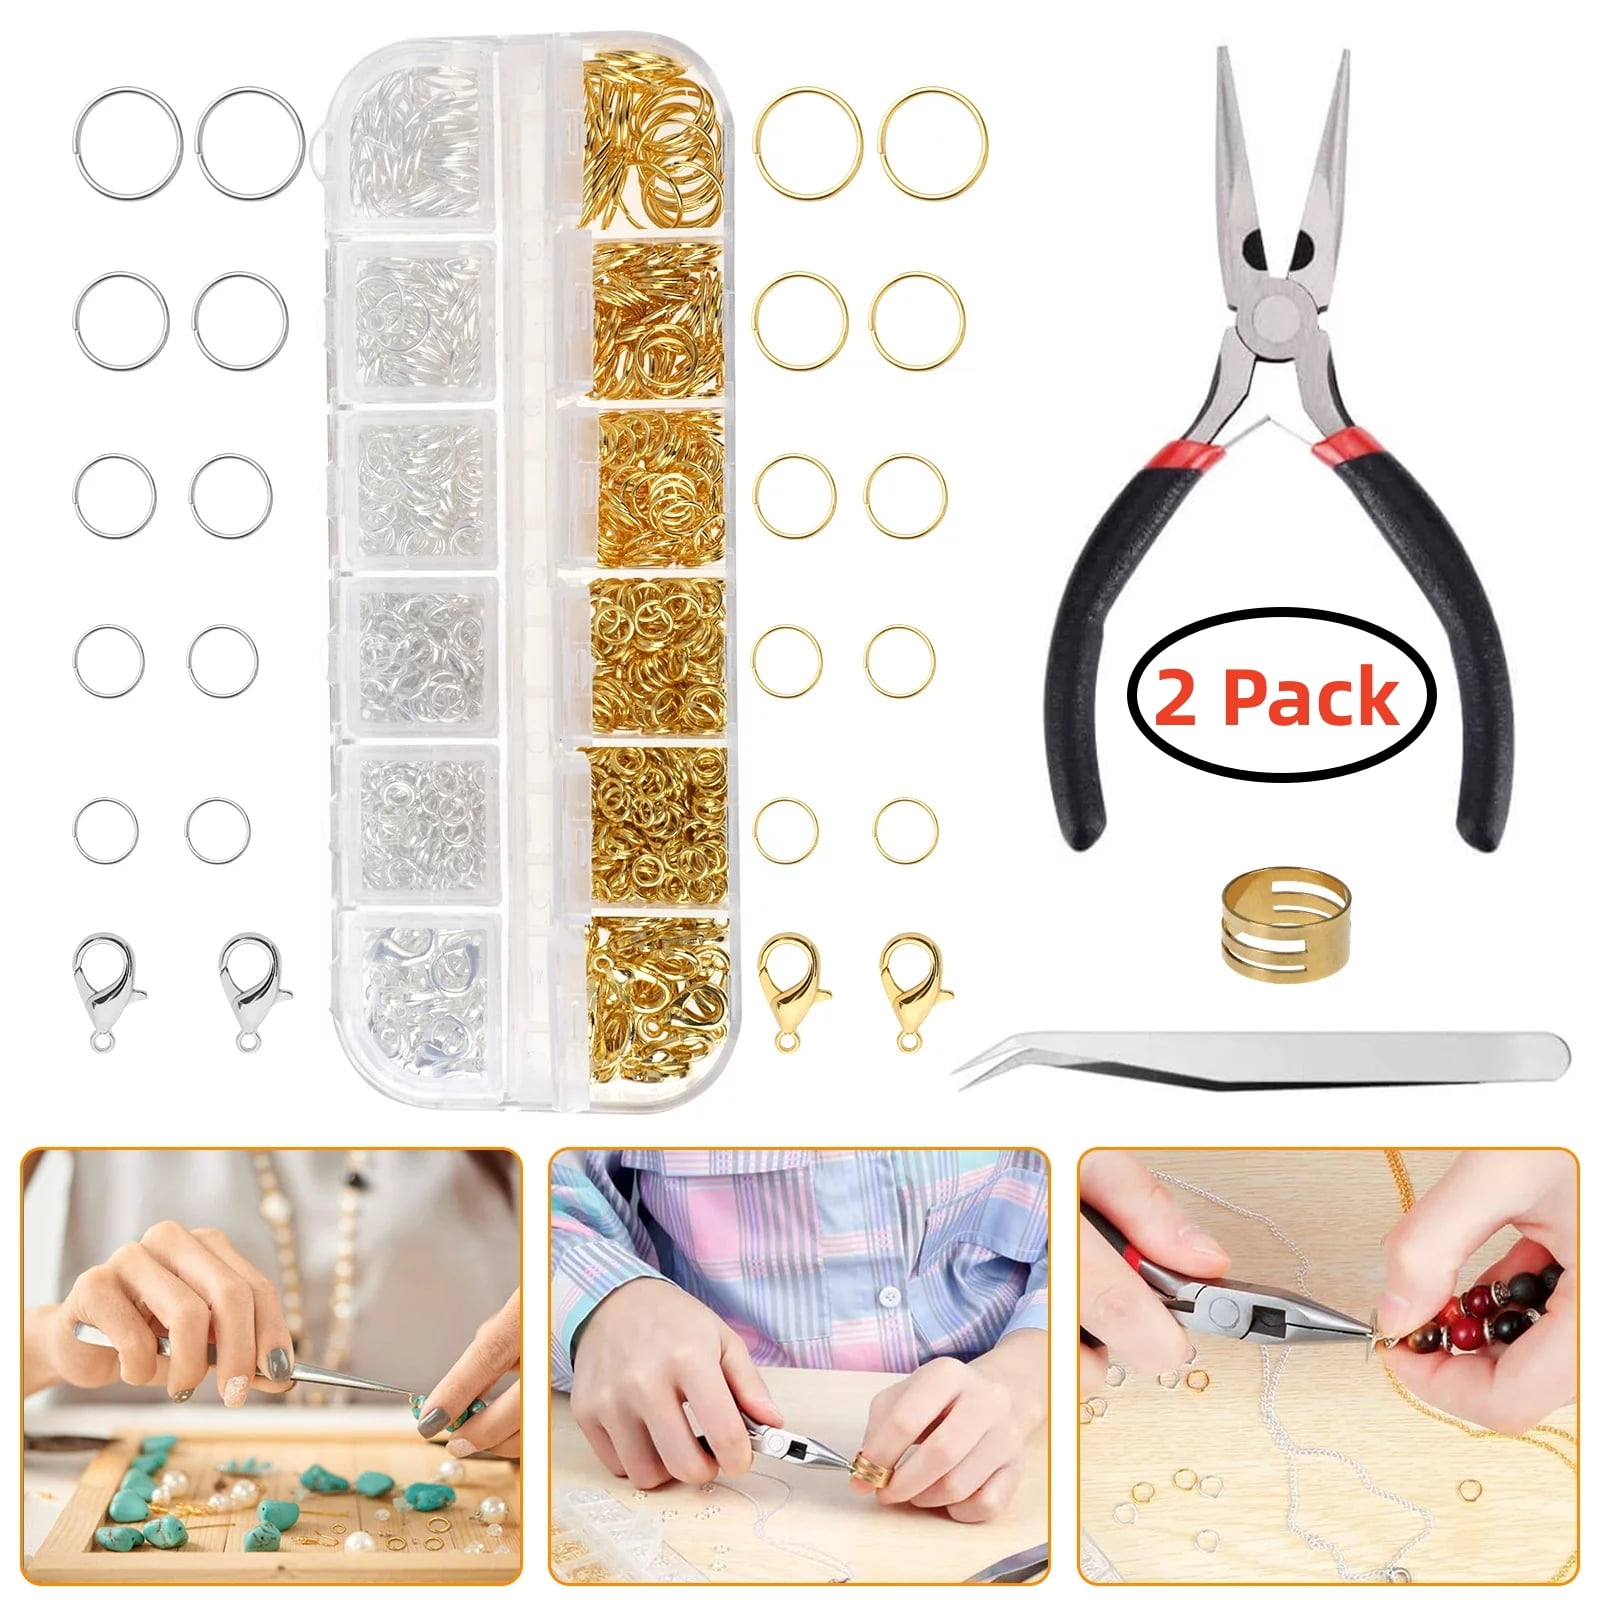 Jewelry Making Kits for adults beginners DIY Jewelry Making Tool Kit  Supplies Kit Jewelry Repair Tools With Accessories